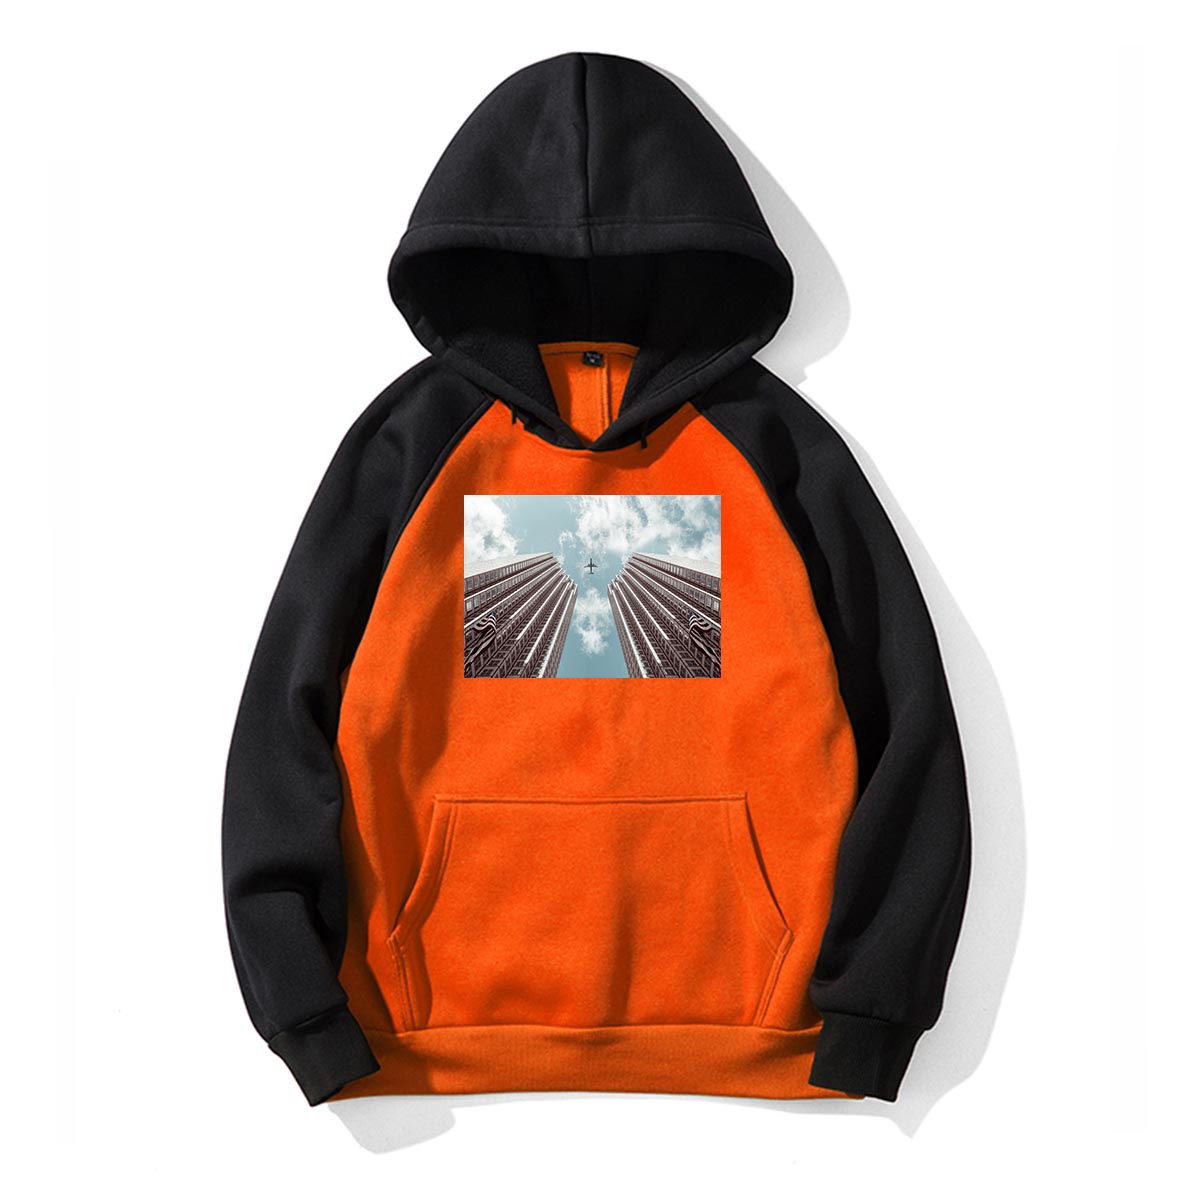 Airplane Flying over Big Buildings Designed Colourful Hoodies